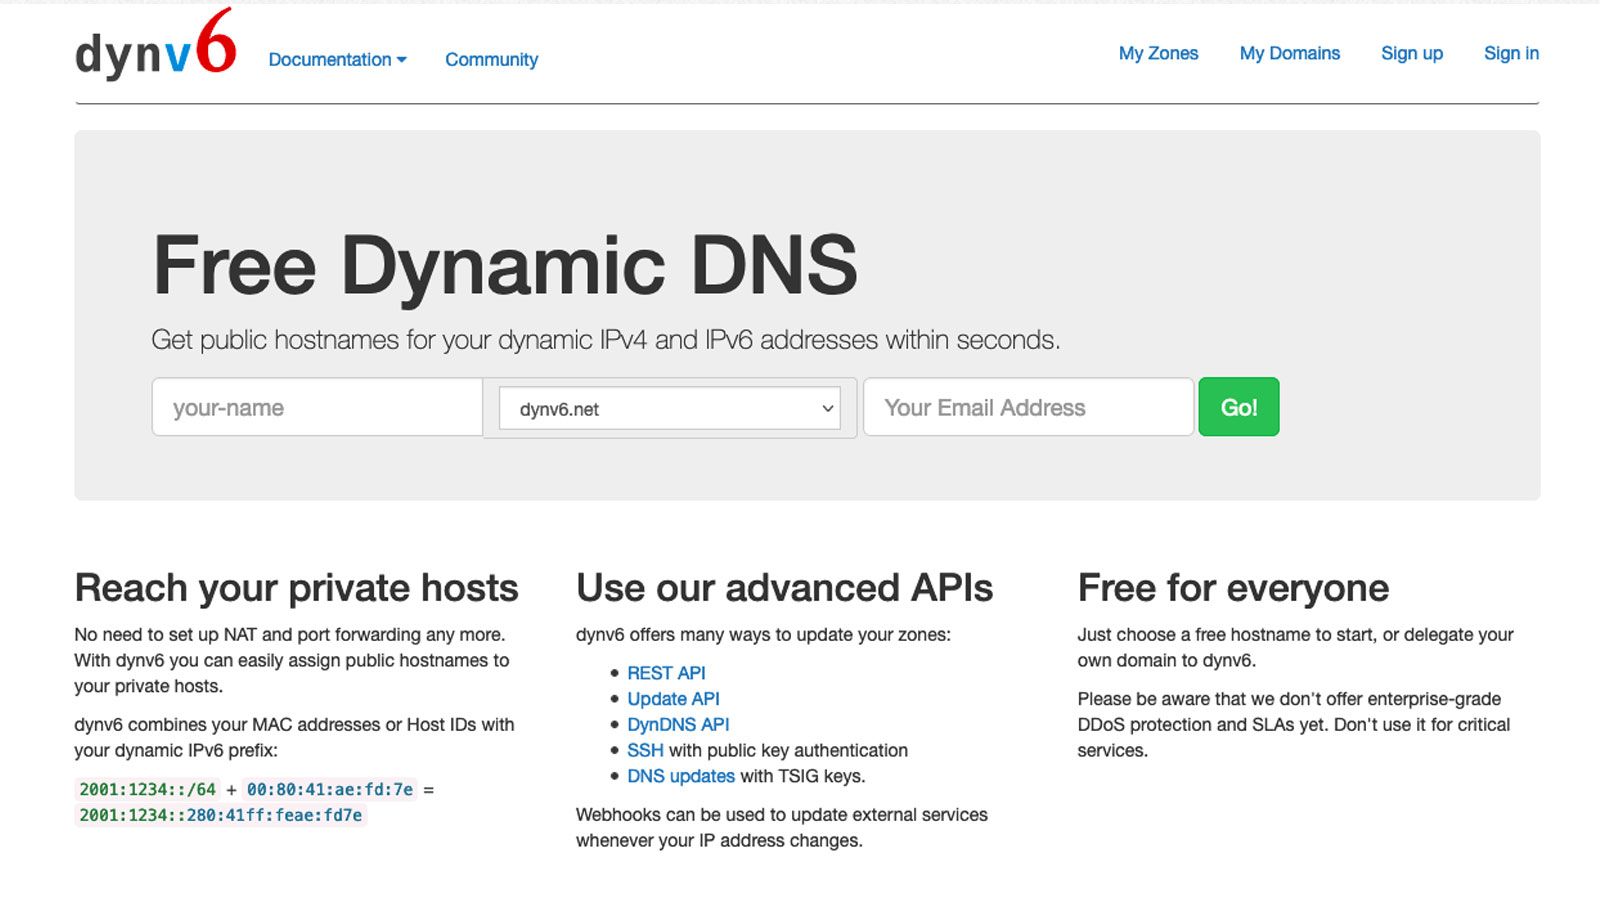 Dynv6 DNS launch page